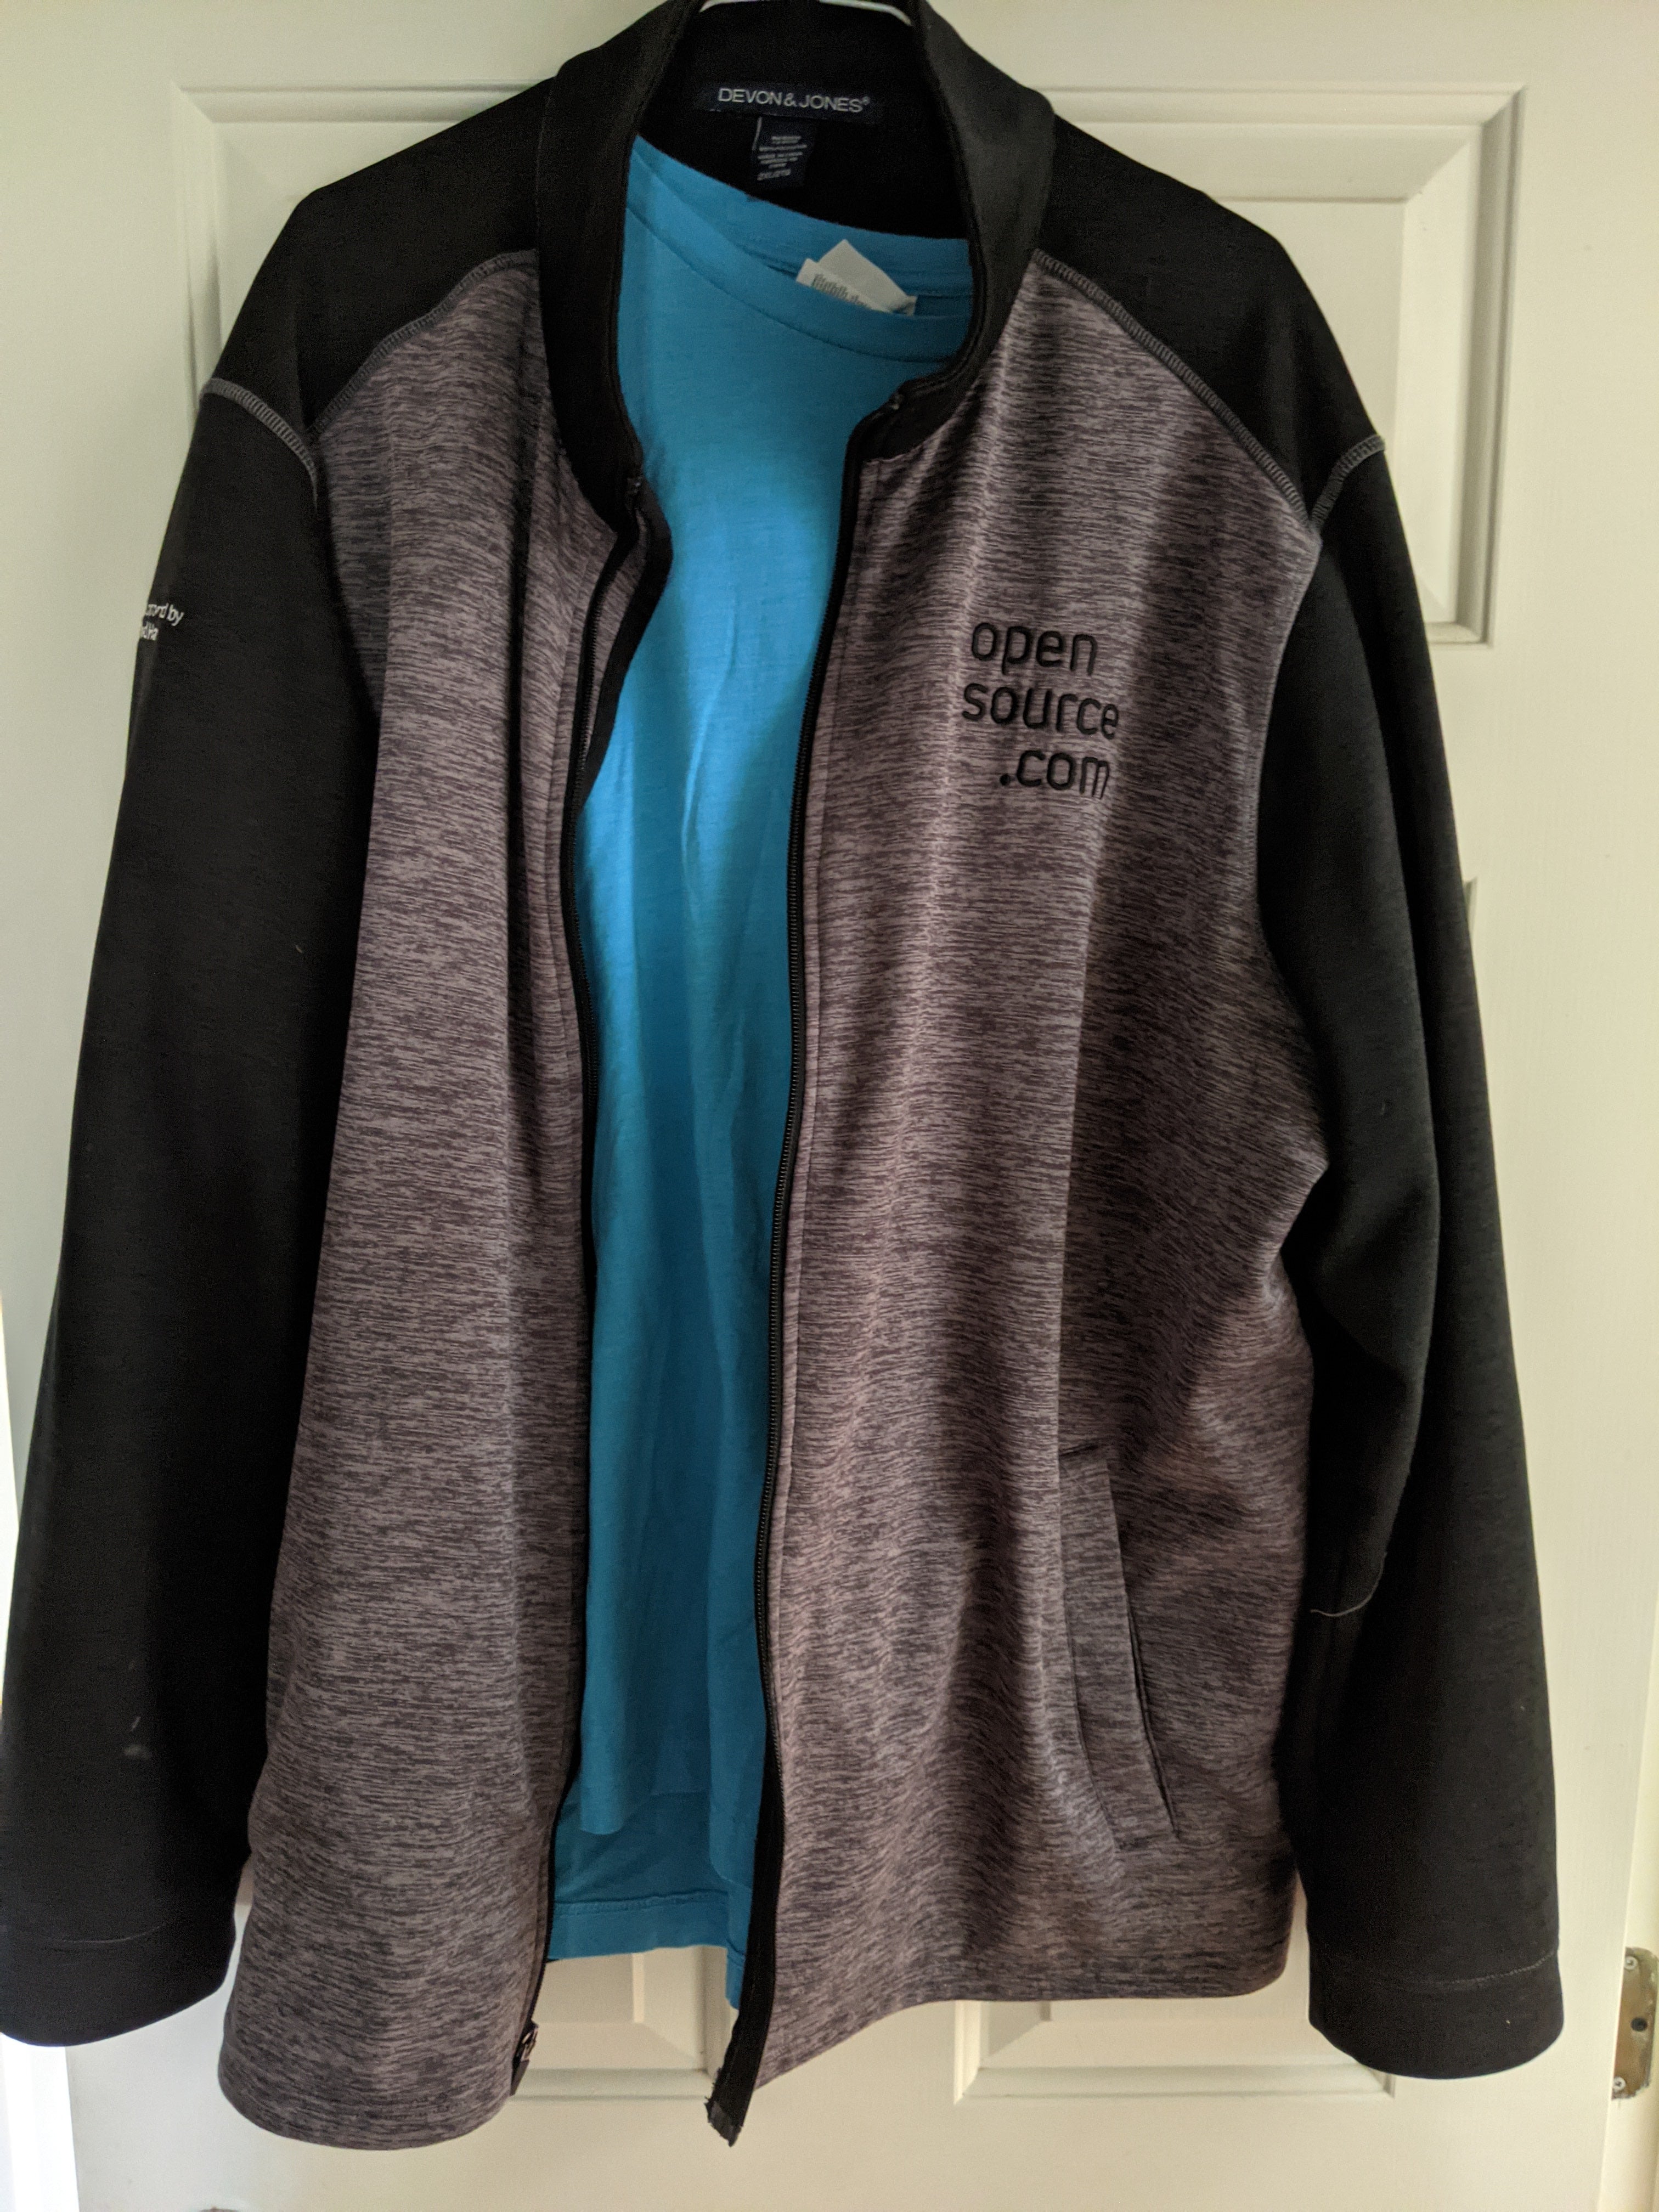 Opensource.com swag, a winter outfit